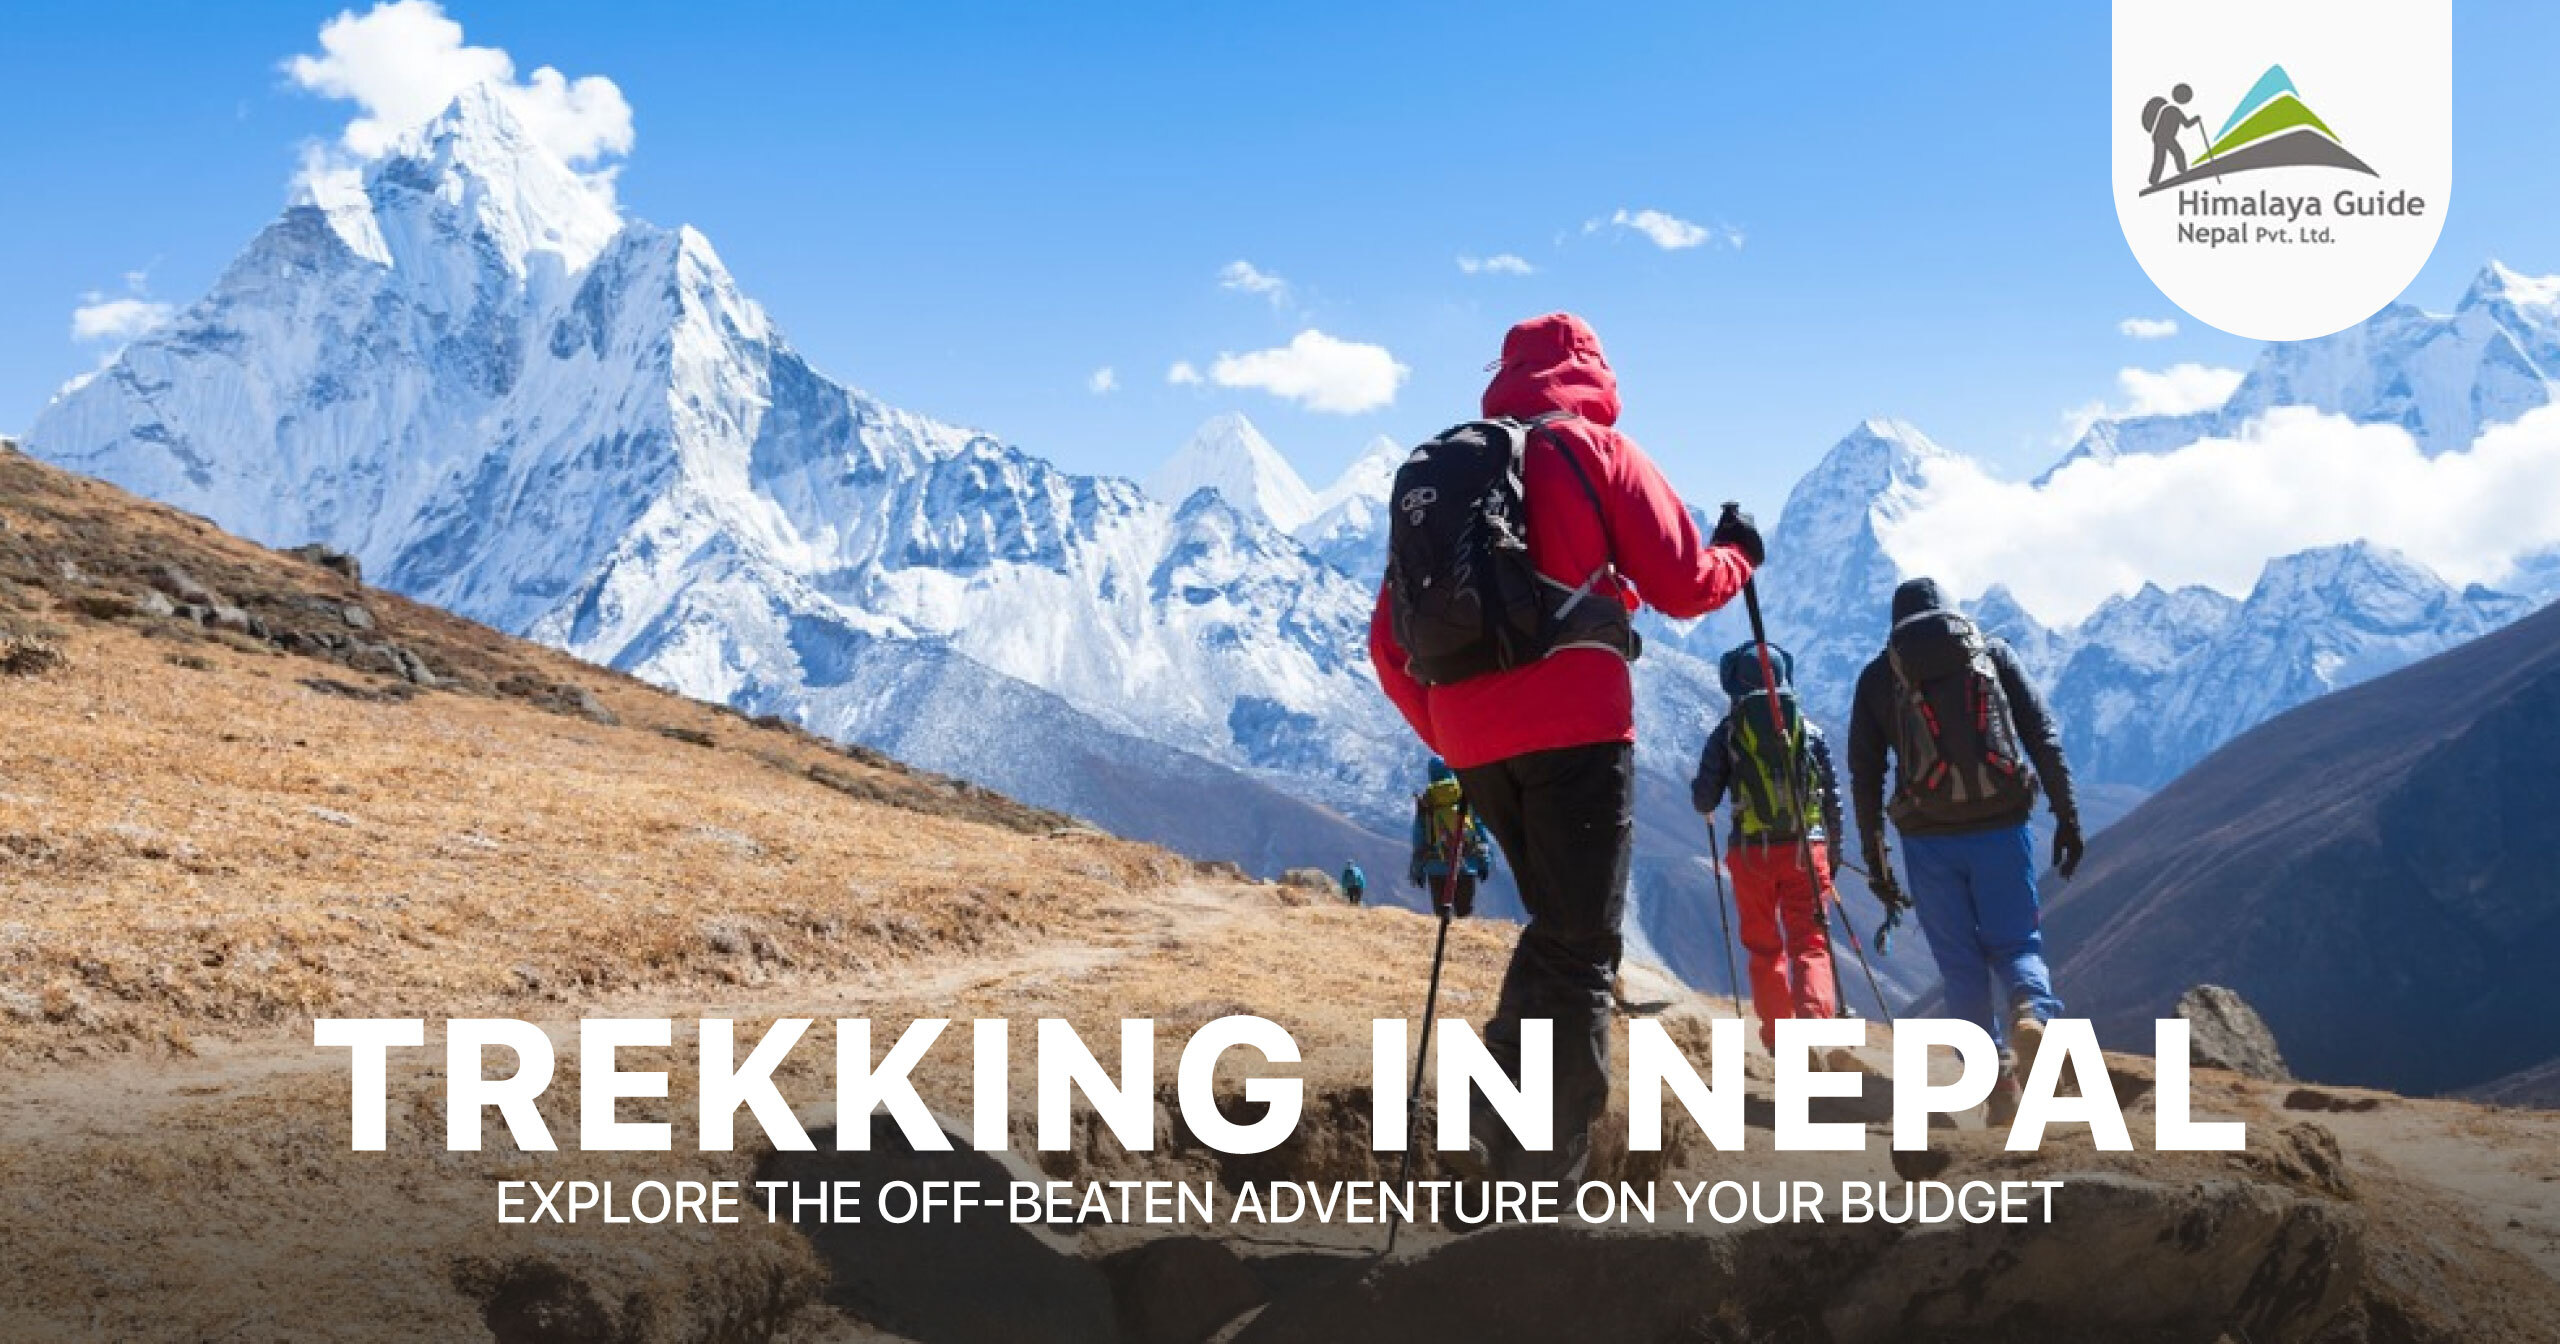 Trekking Equipment and Gear for Your Adventure in Nepal - Nepal Treks and  Tour